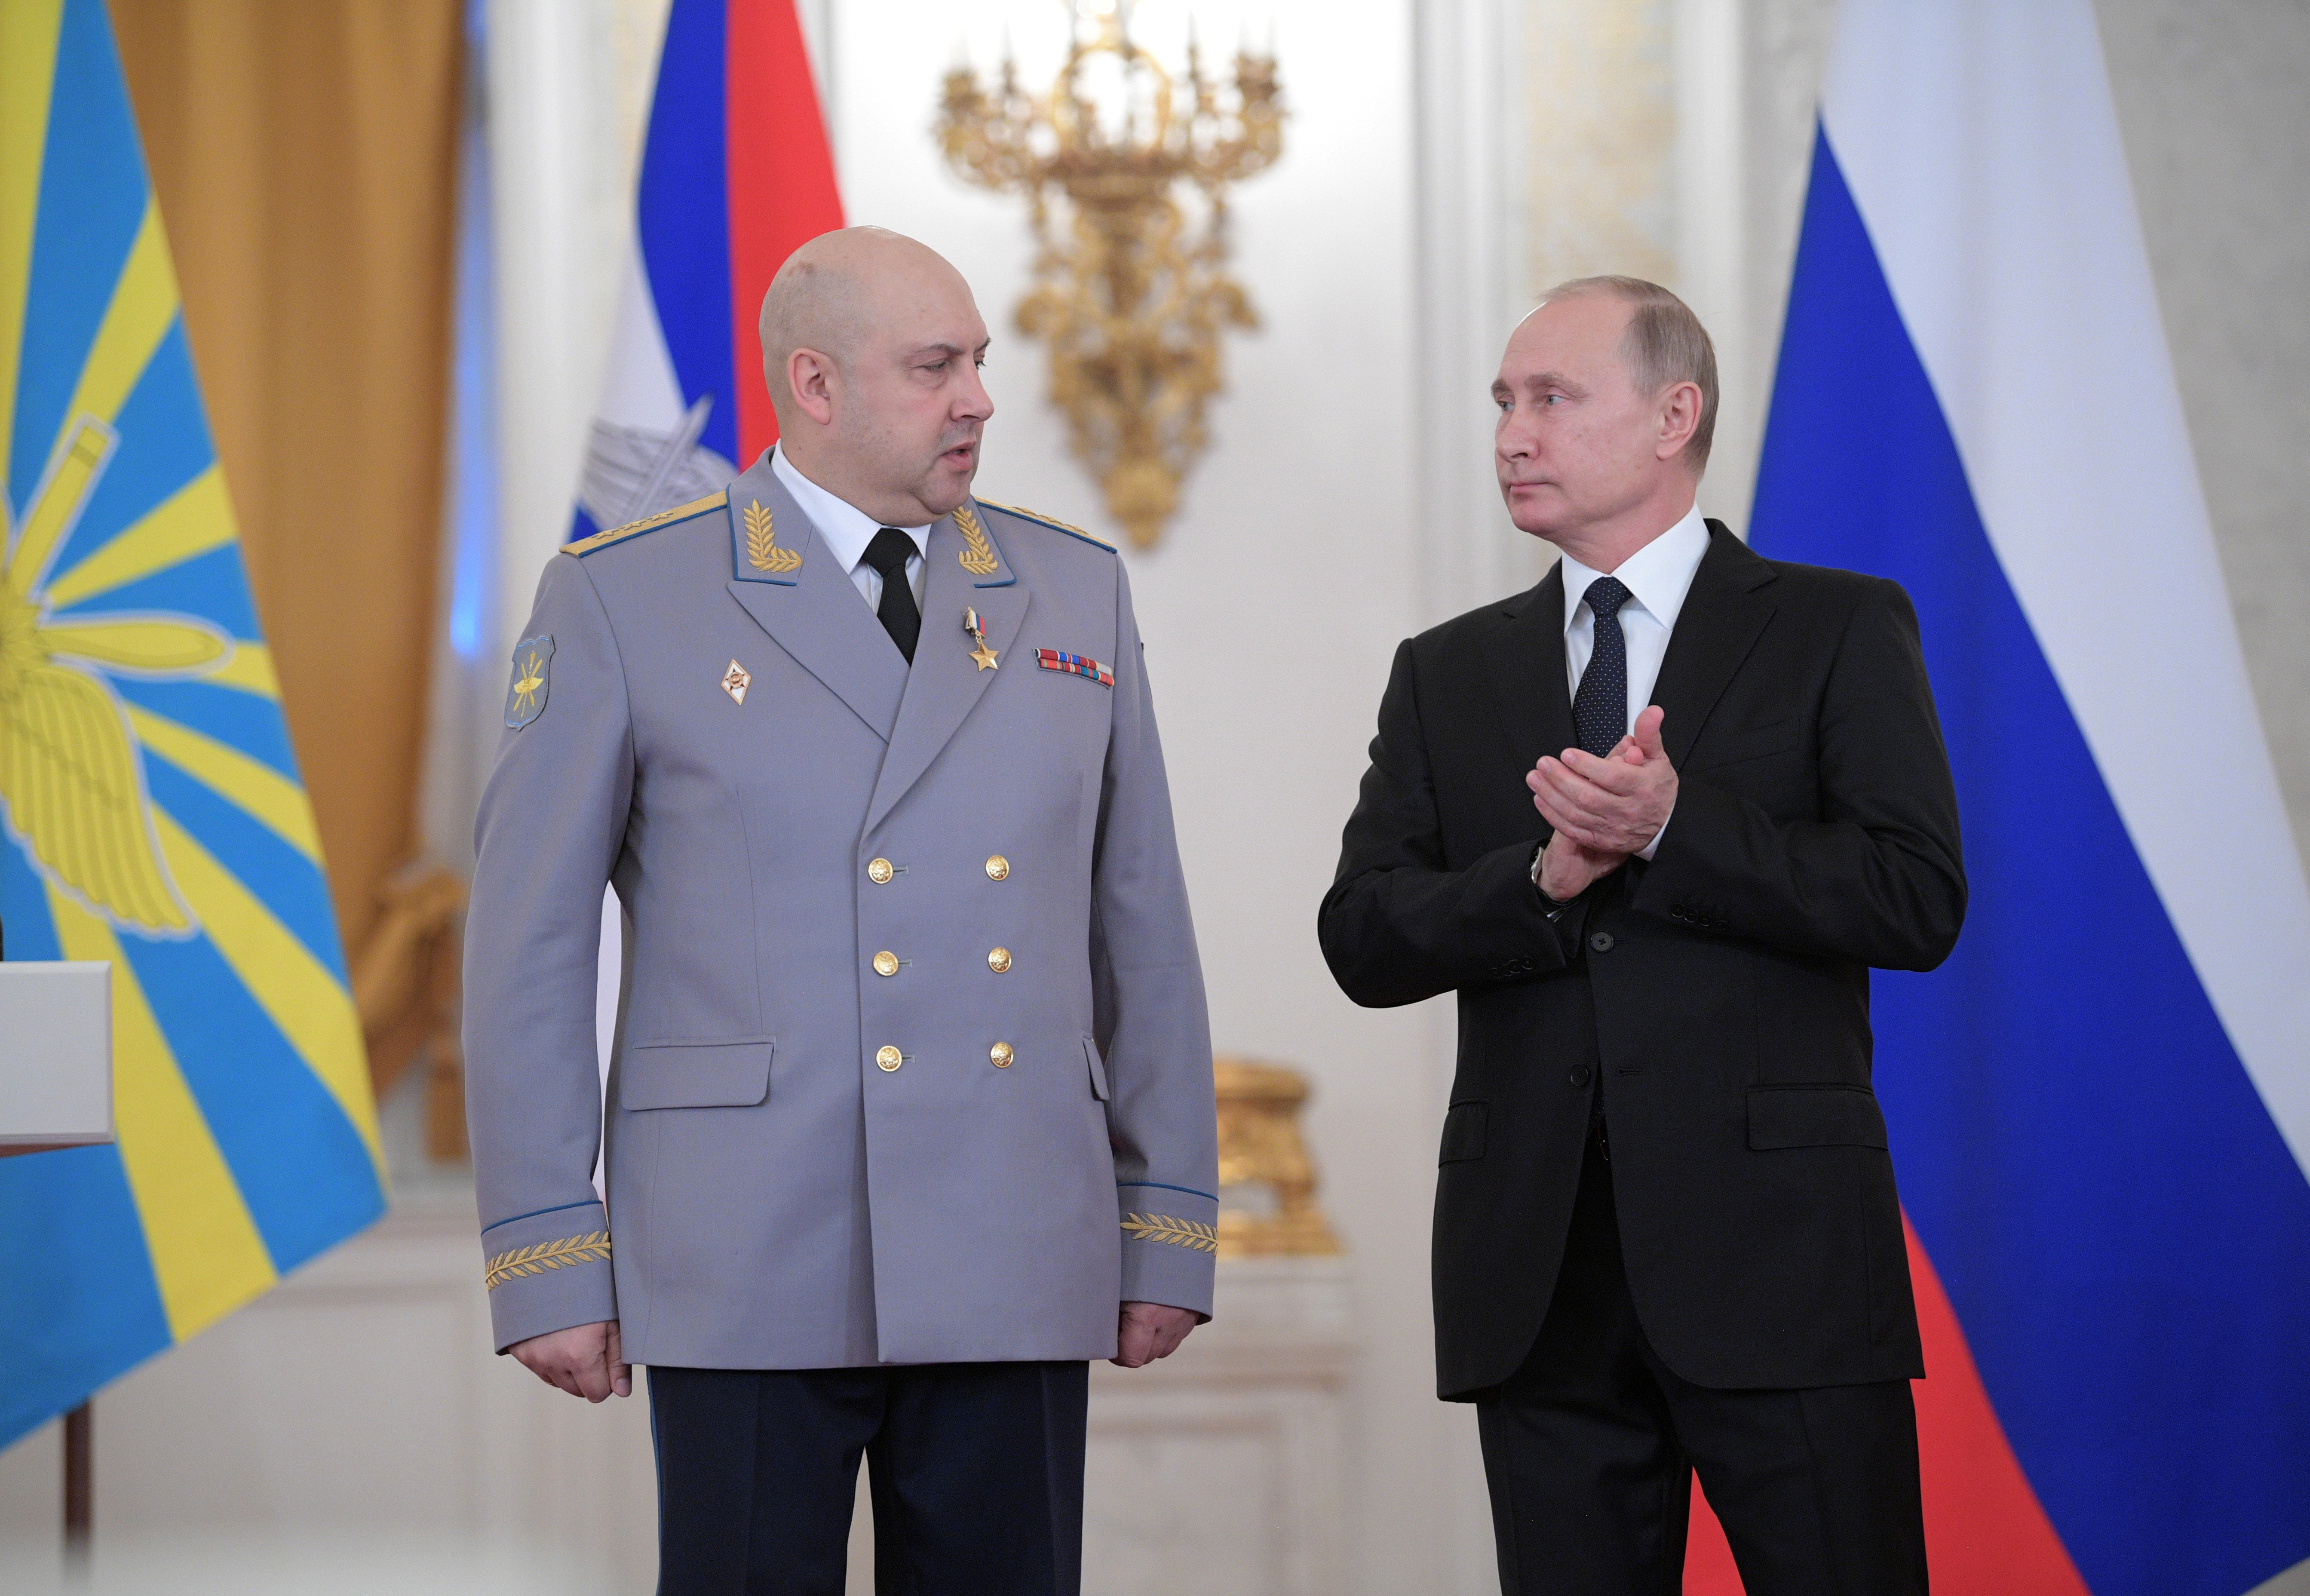 Russian President Vladimir Putin and Colonel General Sergei Surovikin, commander of Russian forces in Syria, attend a state awards ceremony for military personnel who served in Syria, at the Kremlin in Moscow